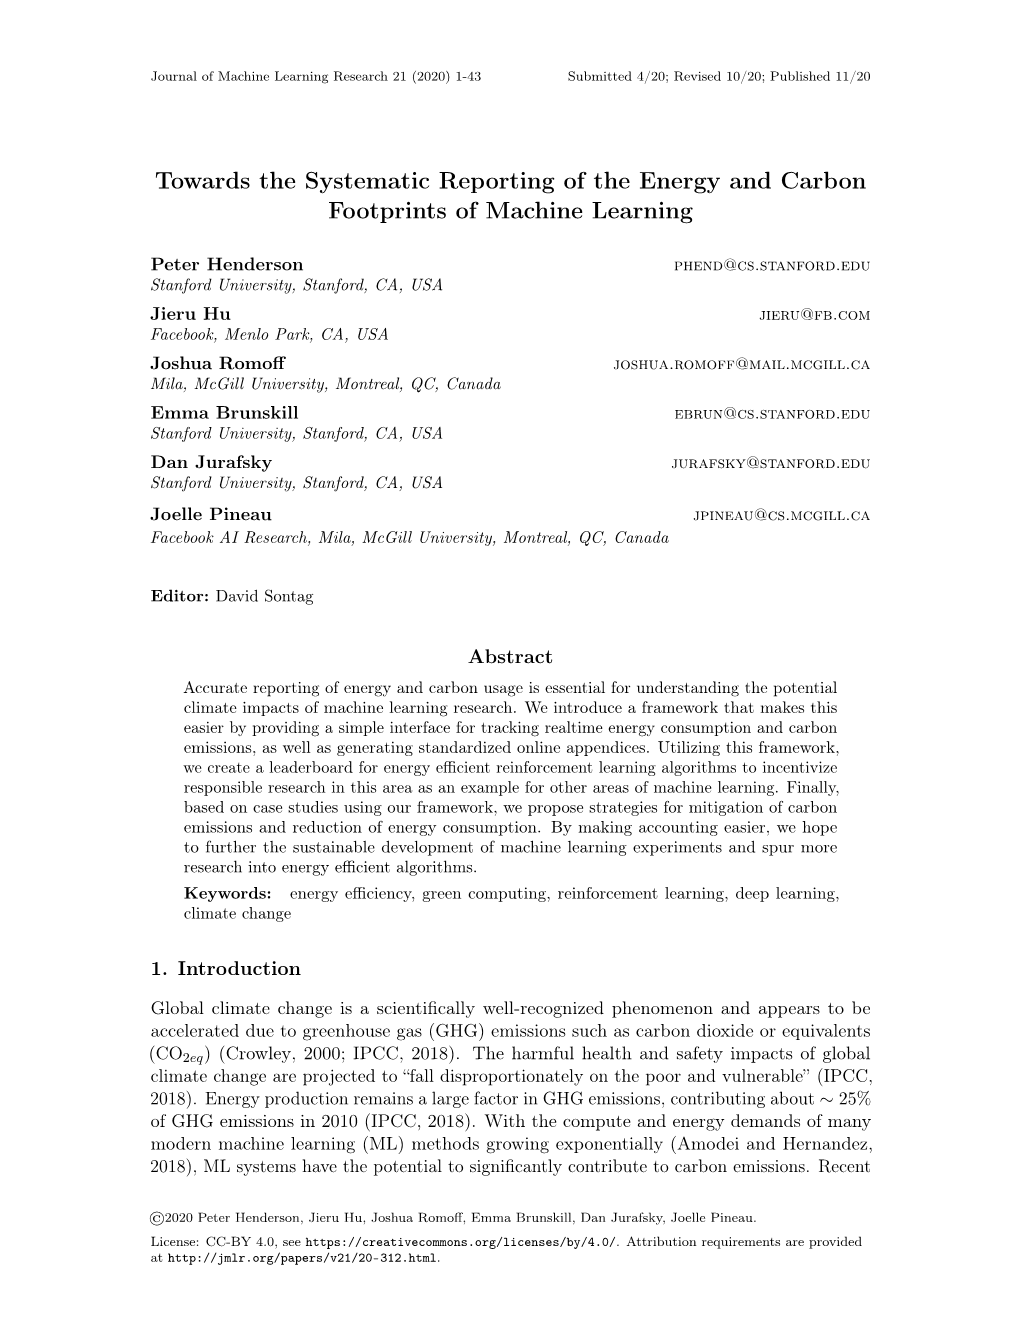 Towards the Systematic Reporting of the Energy and Carbon Footprints of Machine Learning